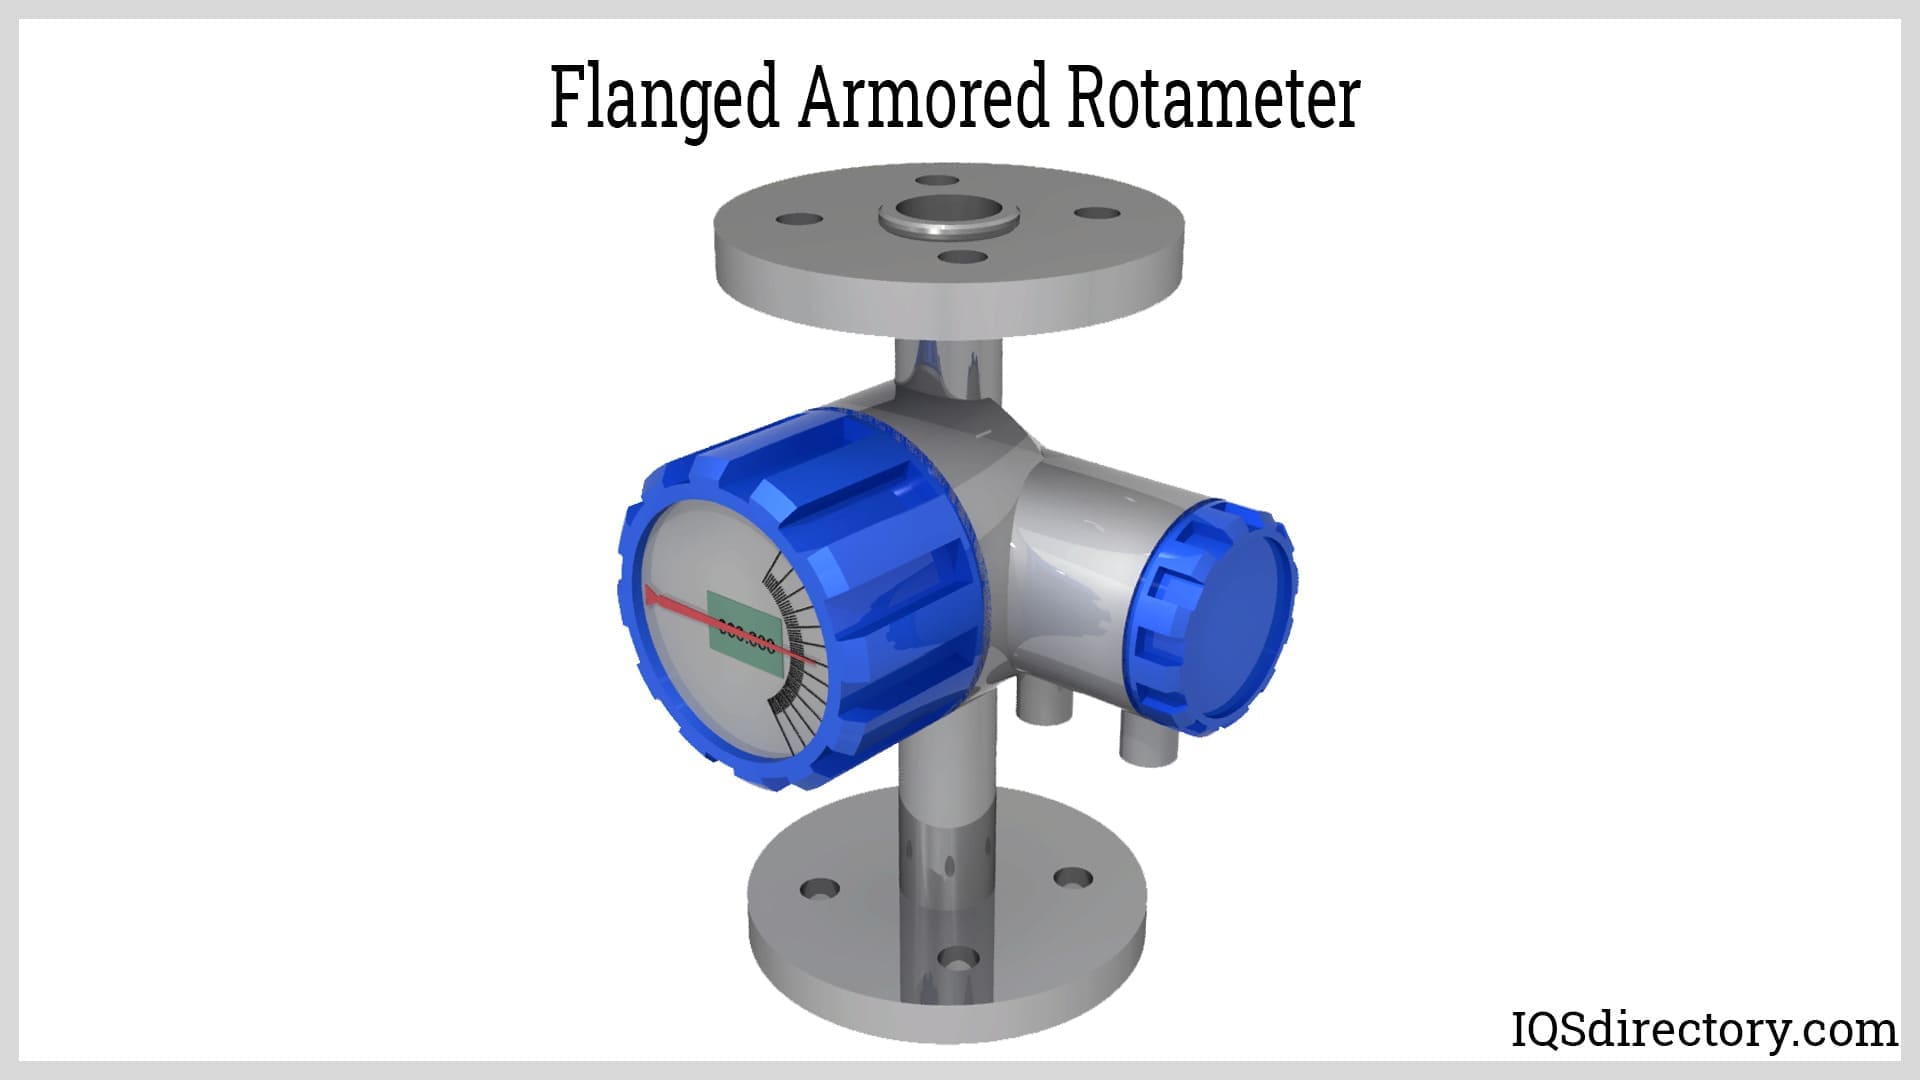 Flanged Armored Rotameter